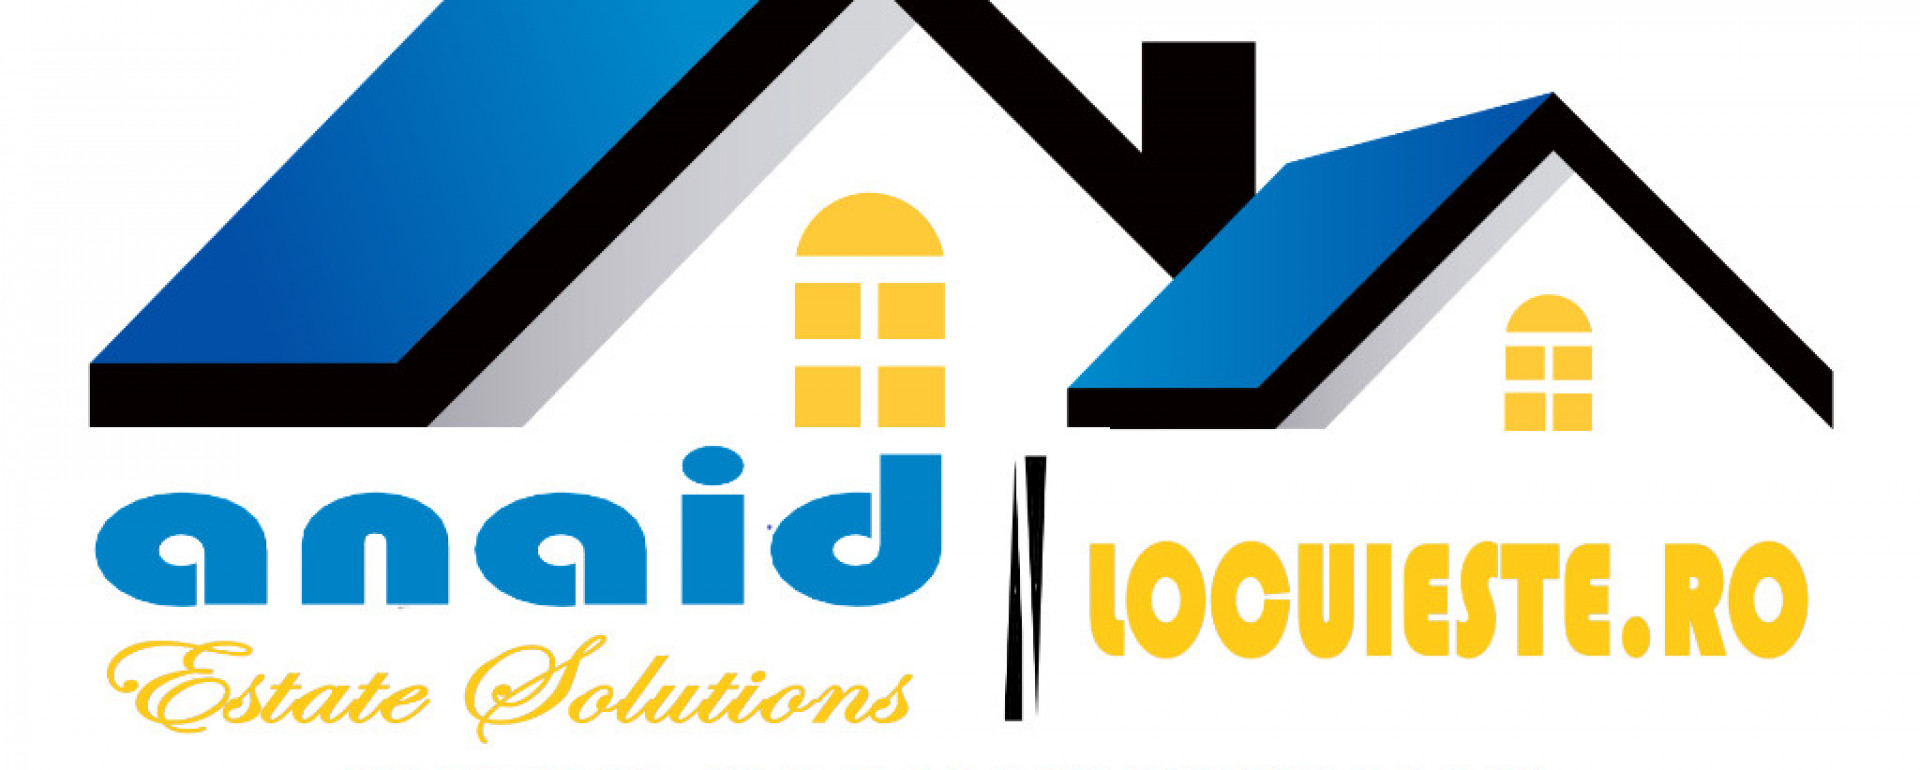 ANAID Estate Solutions